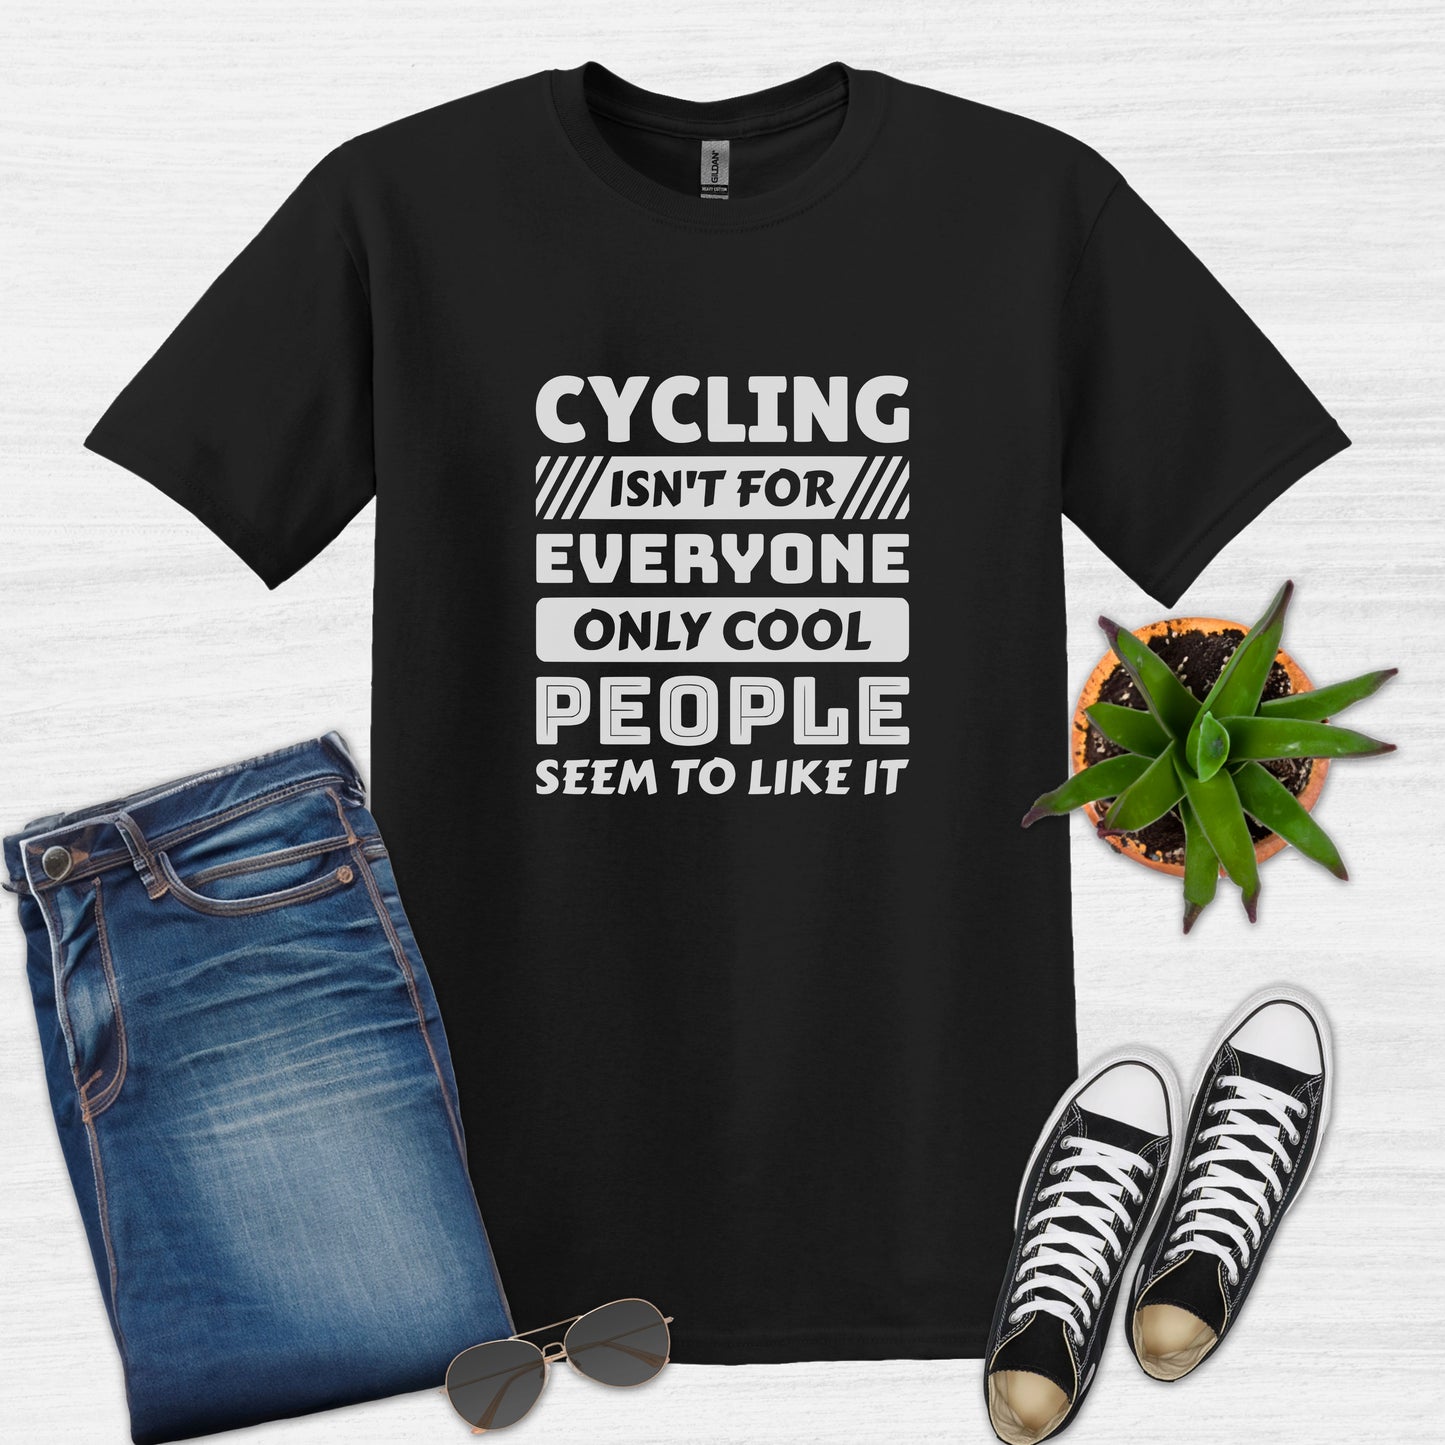 Bike Bliss Cycling isn't for everyone only Cool People seem to like it T-Shirt for Men Black